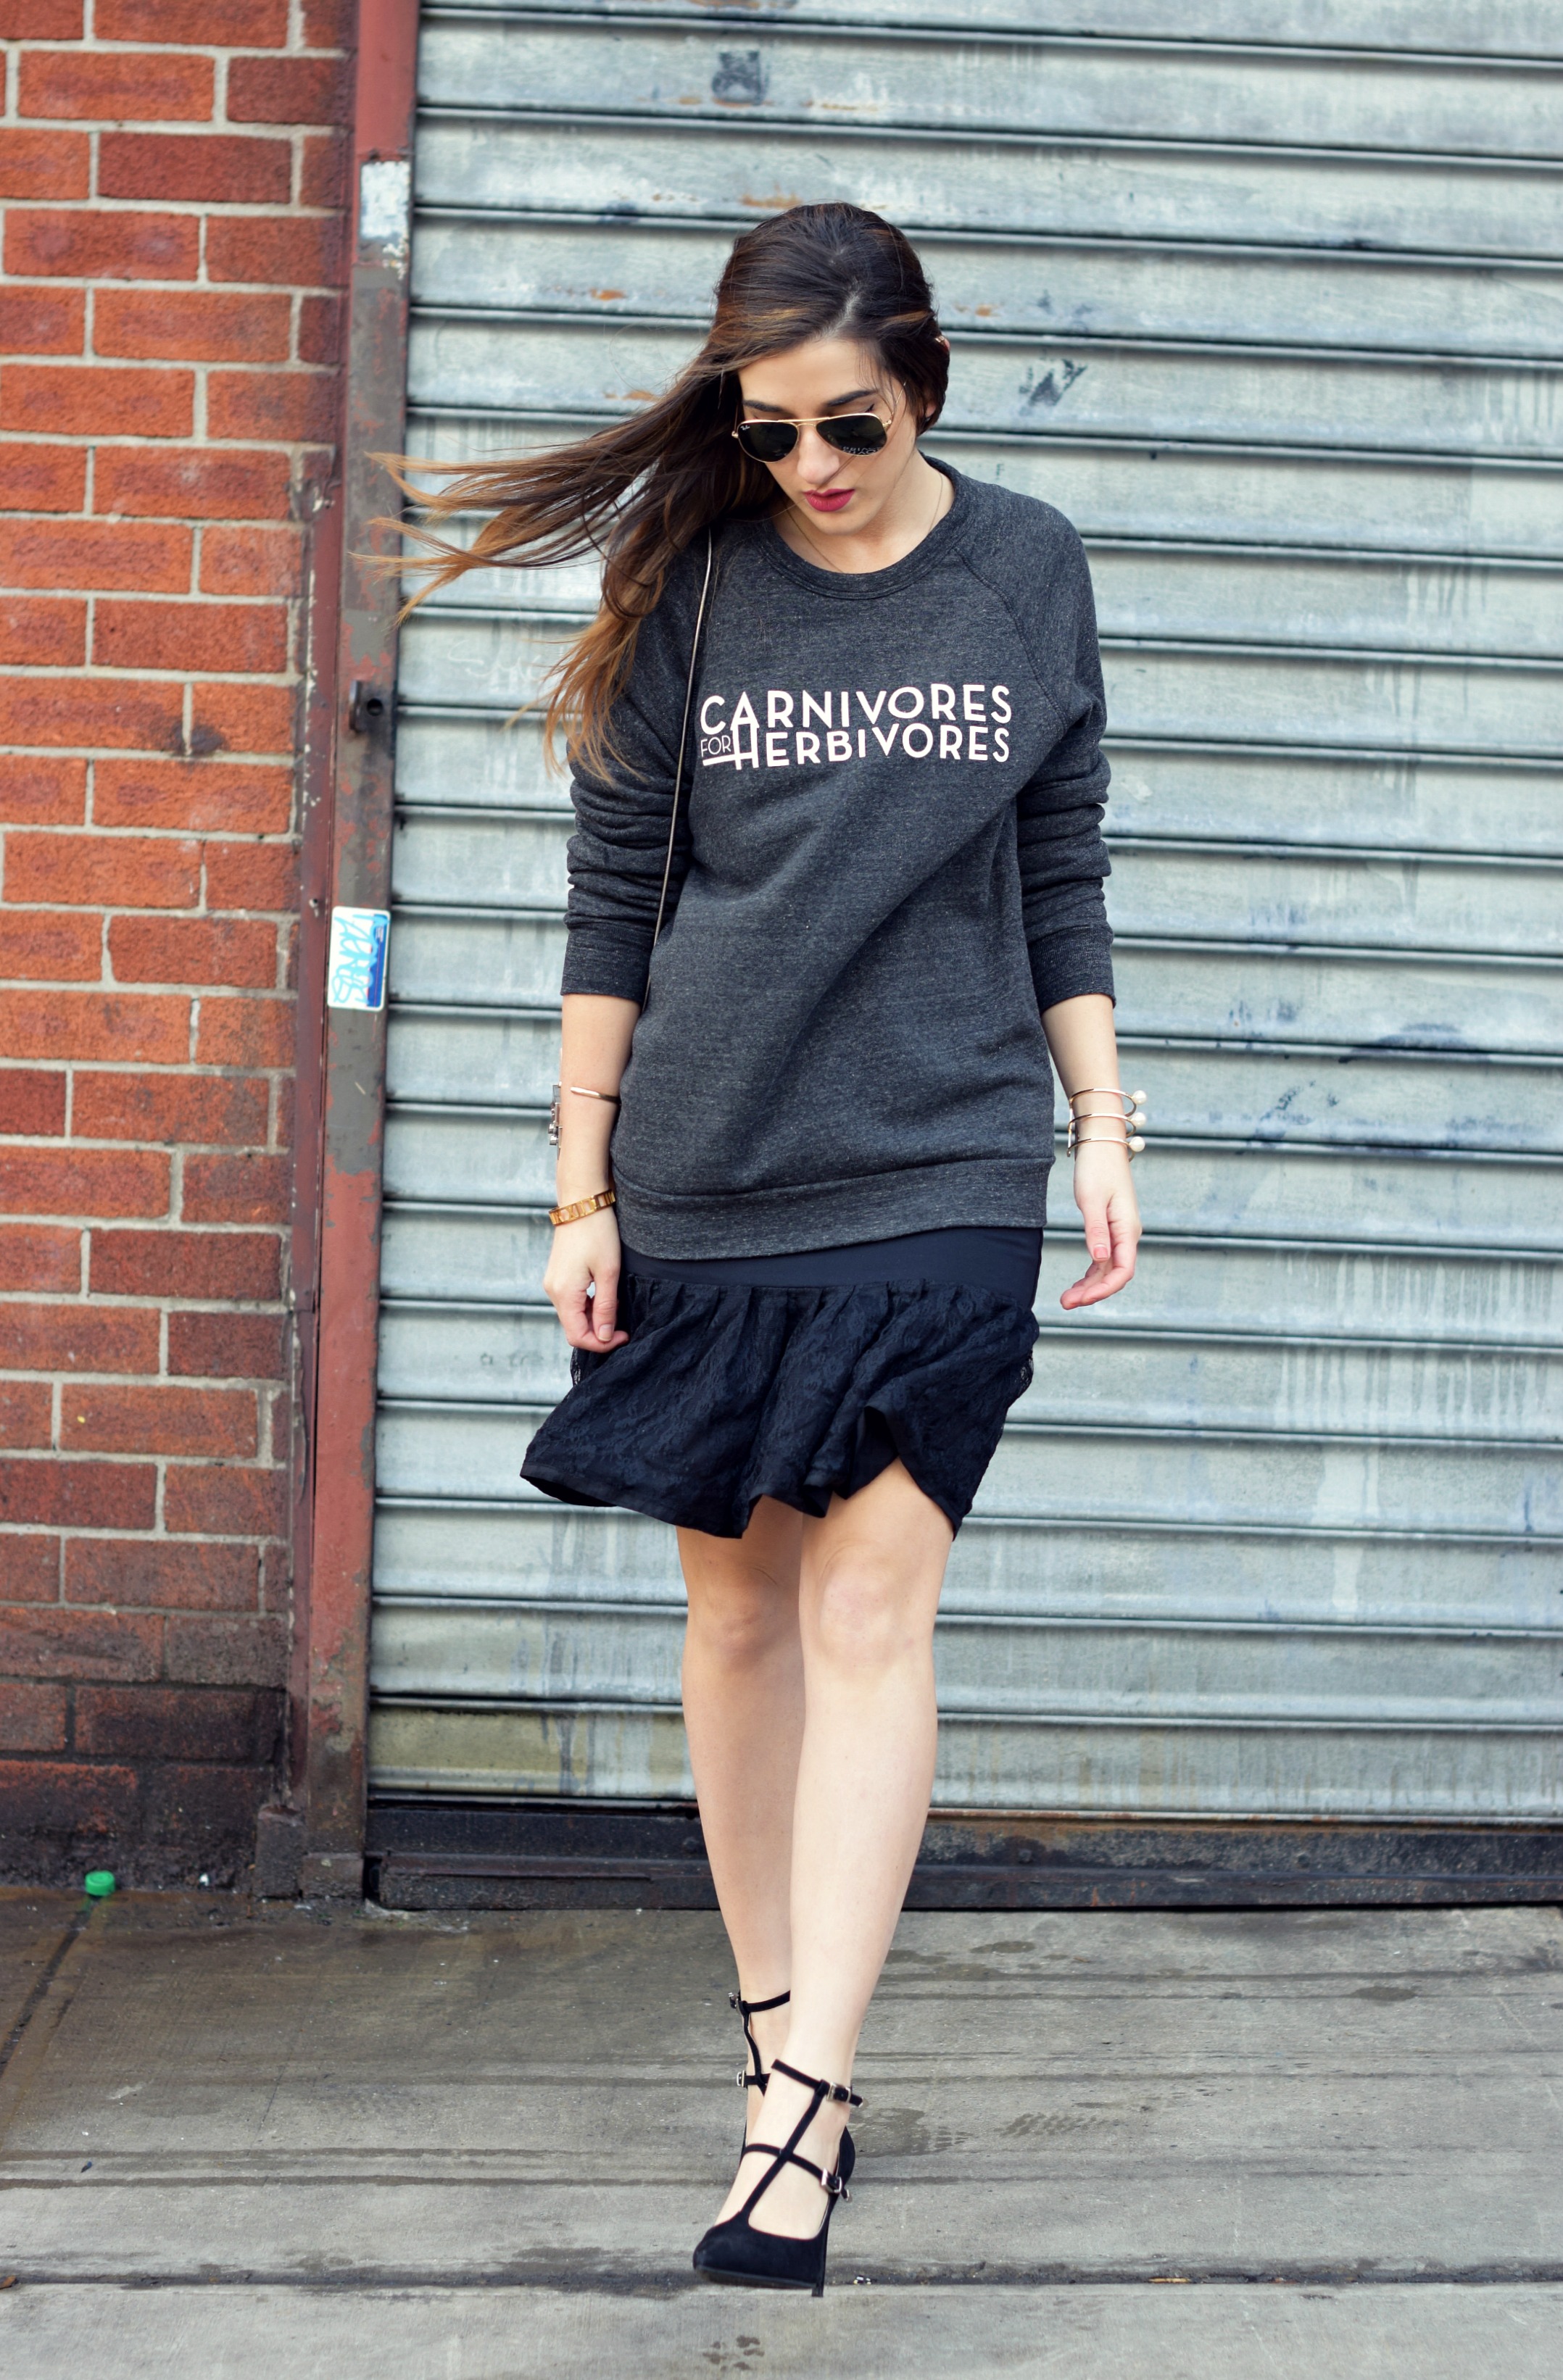 Carnivores For Herbivores Fauxgerty Louboutins & Love Fashion Blog Esther Santer NYC Street Style Blogger Animal Lover Cruelty Free Suede Vegan Leather RayBan Aviators Sunglasses Grey Sweatshirt Girl Women Lace Skirt OOTD Outfit Shop USA Hair Inspo.jpg